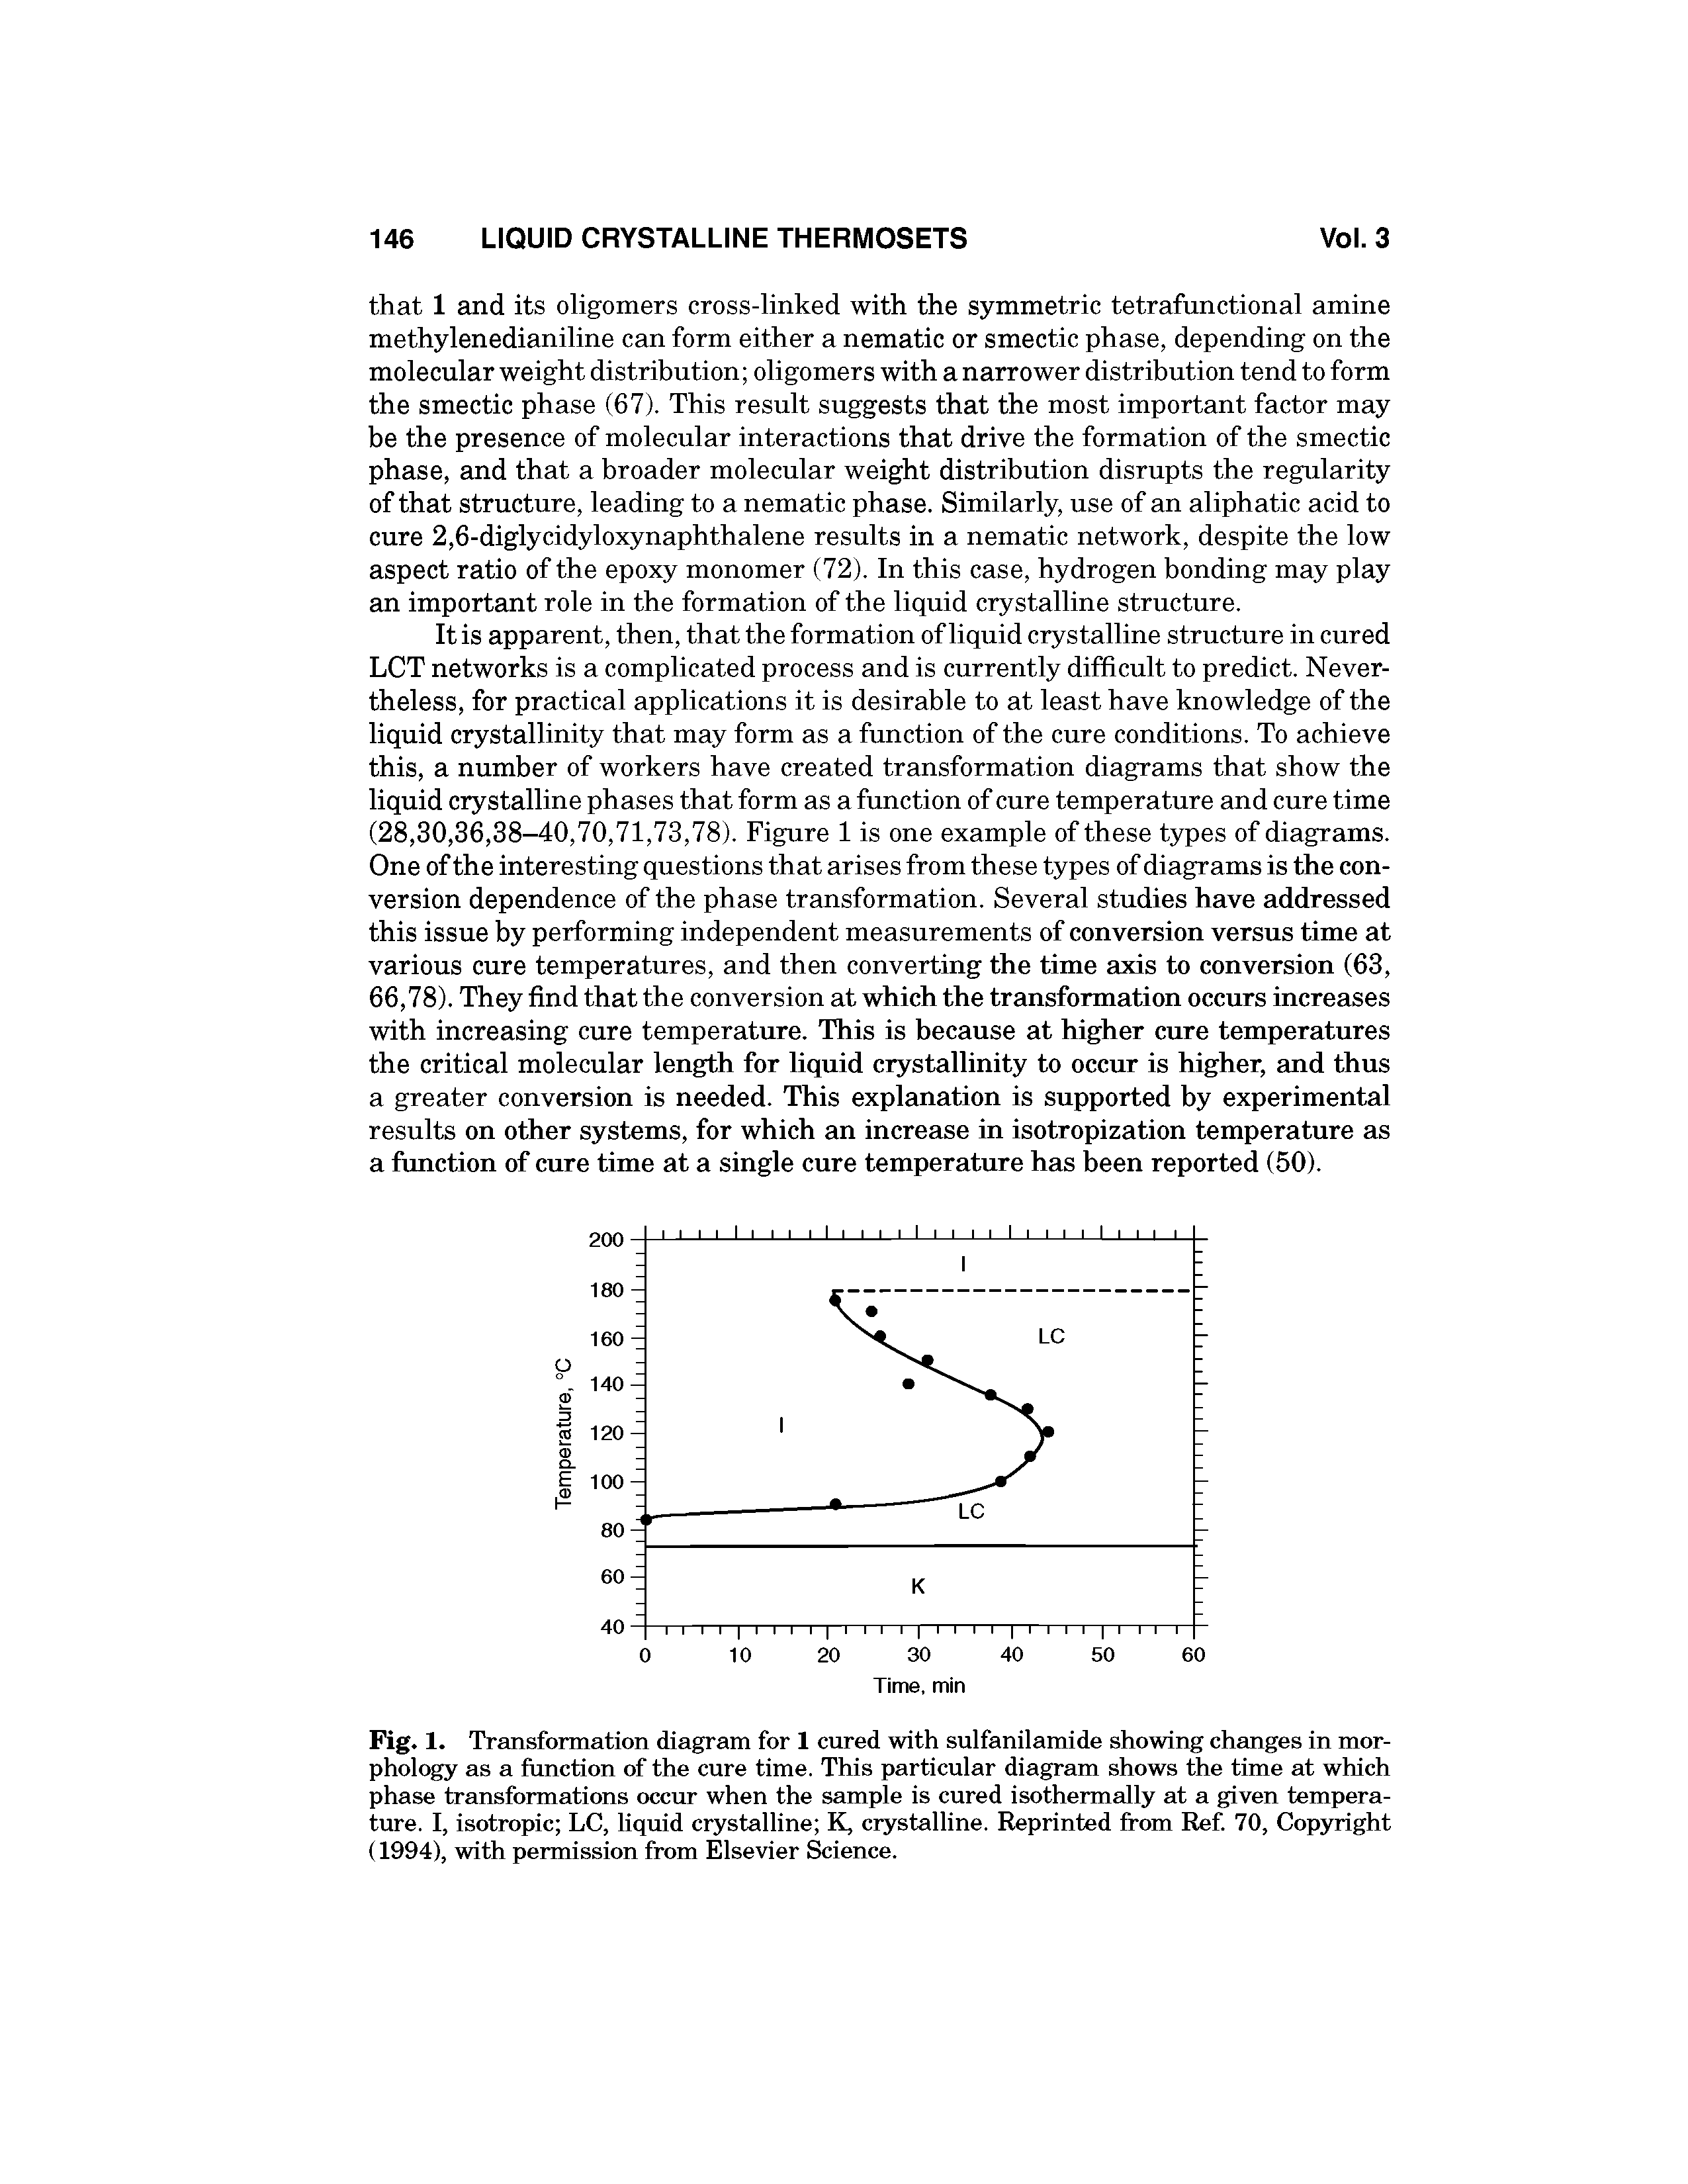 Fig. 1. Transformation diagram for 1 cured with sulfanilamide showing changes in morphology as a function of the cure time. This particular diagram shows the time at which phase transformations occur when the sample is cured isothermally at a given temperature. I, isotropic LC, liquid crystalline K, crystalline. Reprinted from Ref. 70, Copyright (1994), with permission from Elsevier Science.